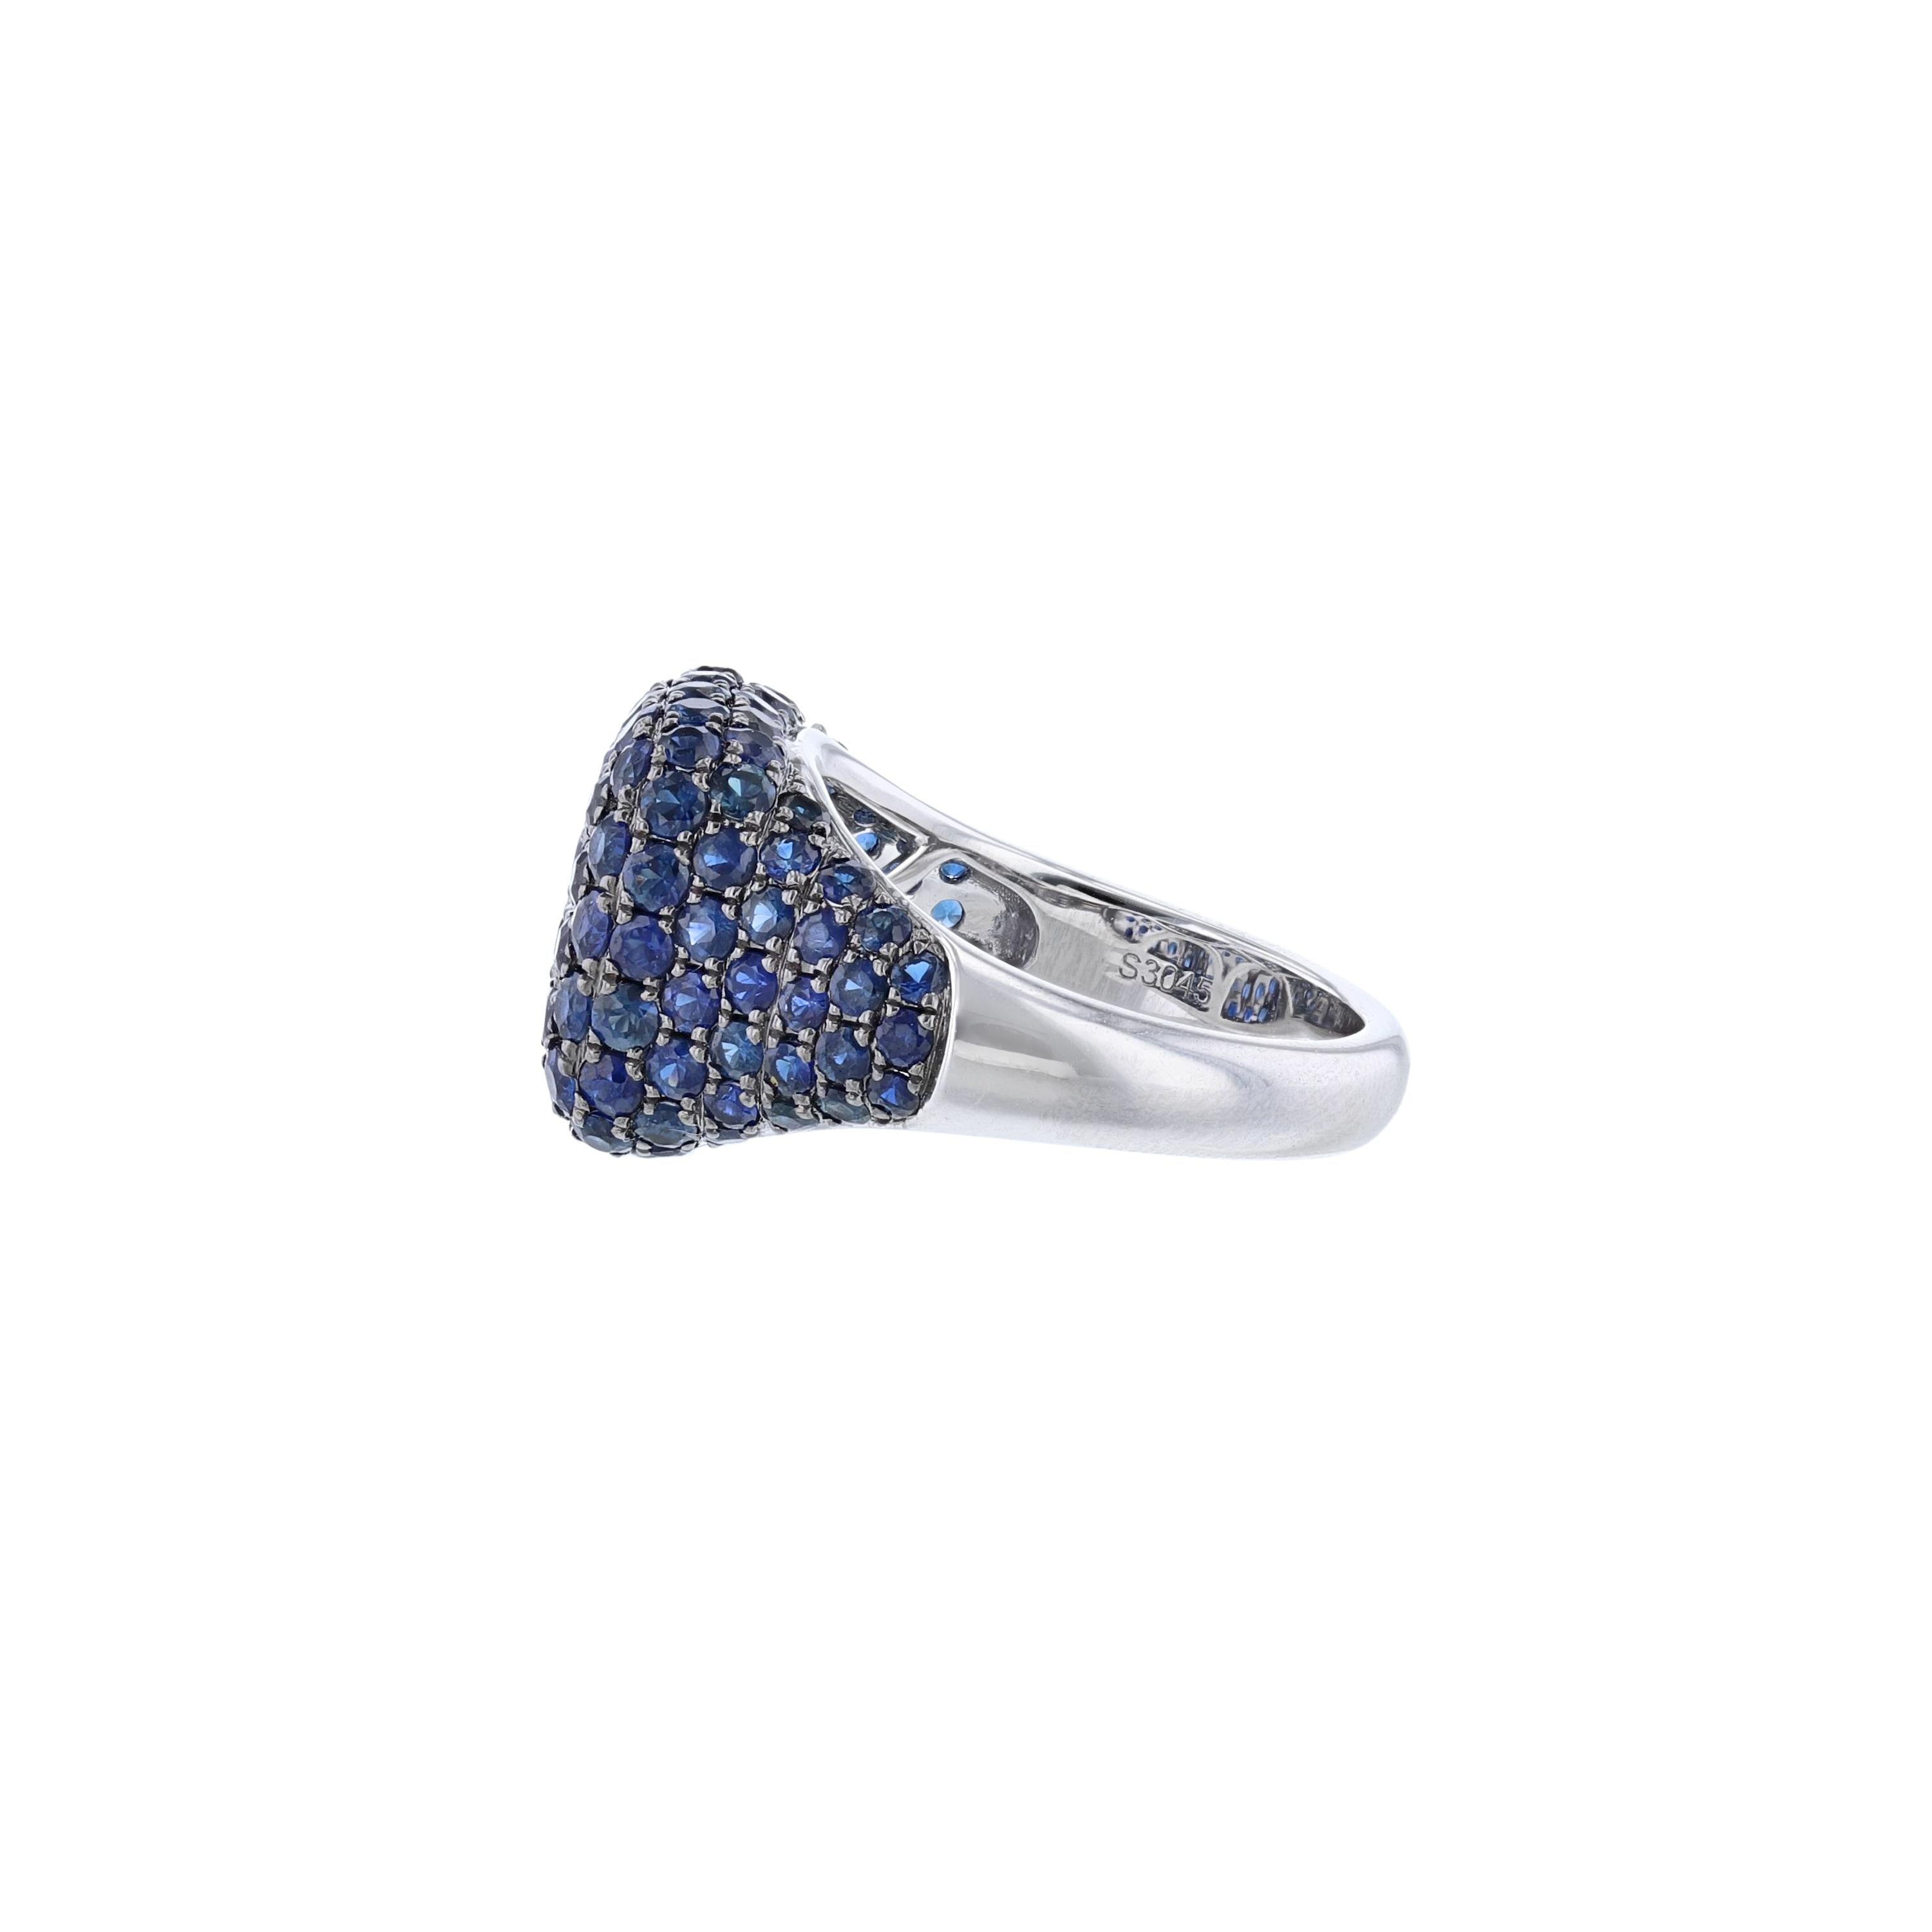 This ring is made in 18k white gold and features 114 blue sapphires weighing 3.05 carats.  Sapphires are pave’ set. With a color grade (H).